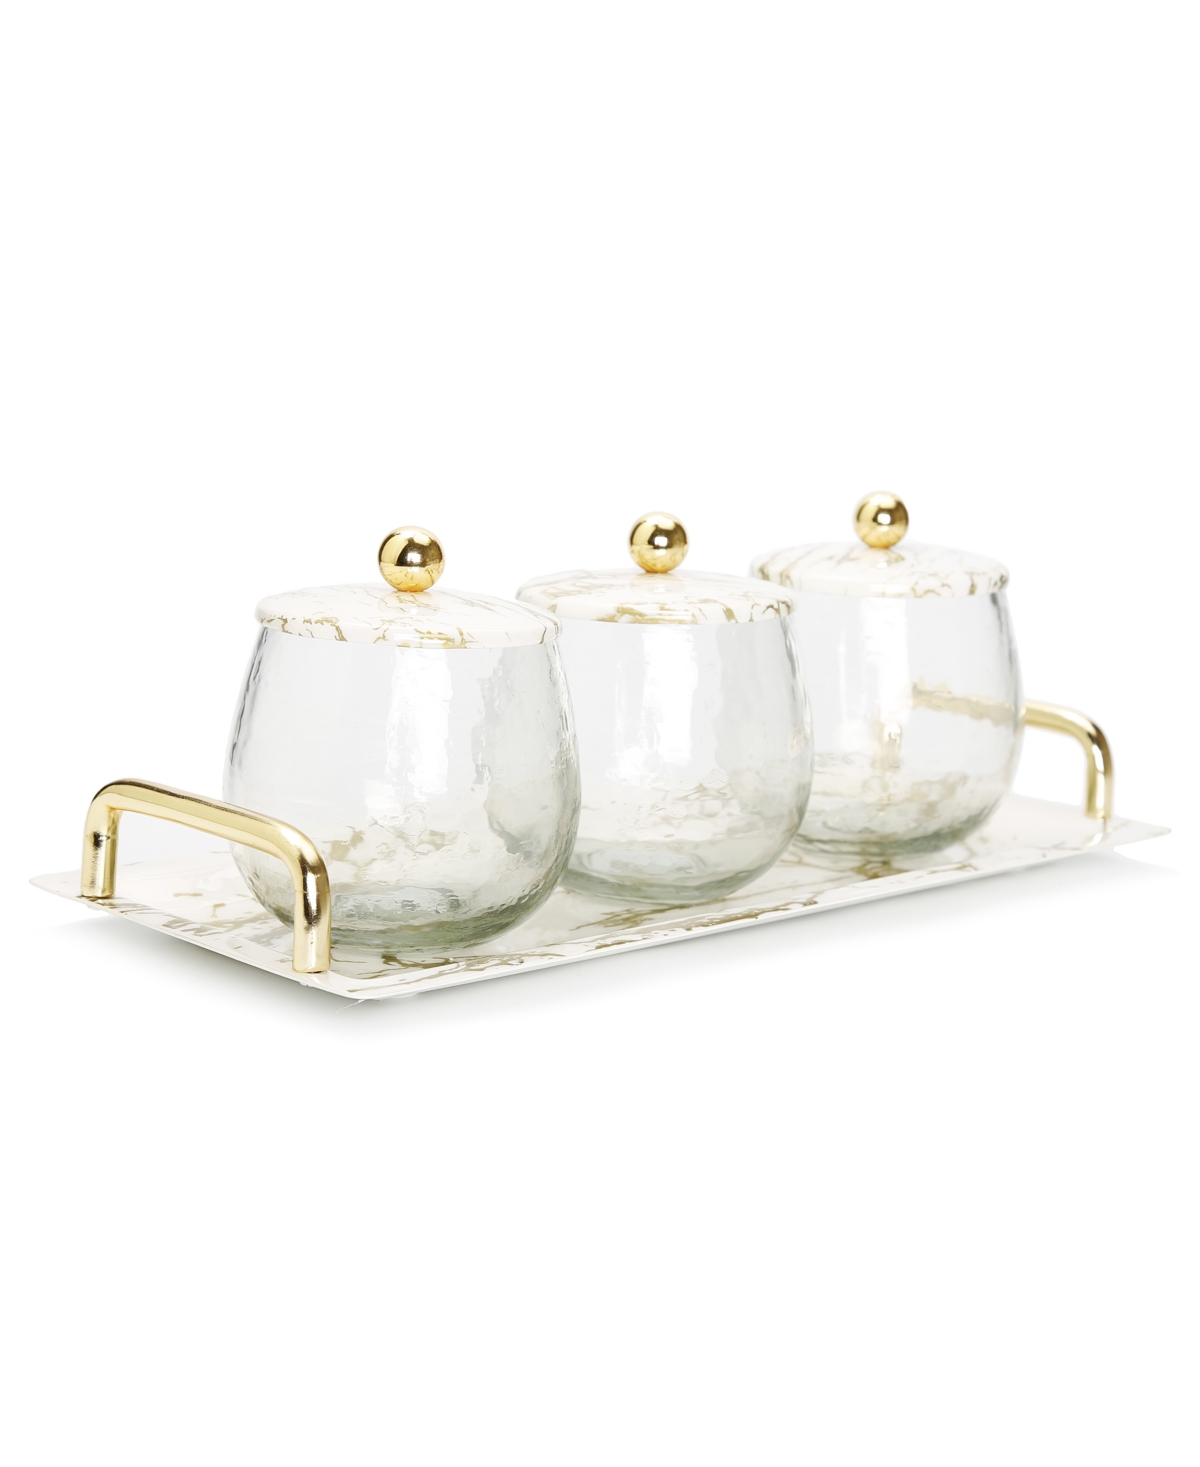 Gold-Tone Marble 3 Bowl Serving Dish with Gold-Tone Ball Design, Set of 4 - White